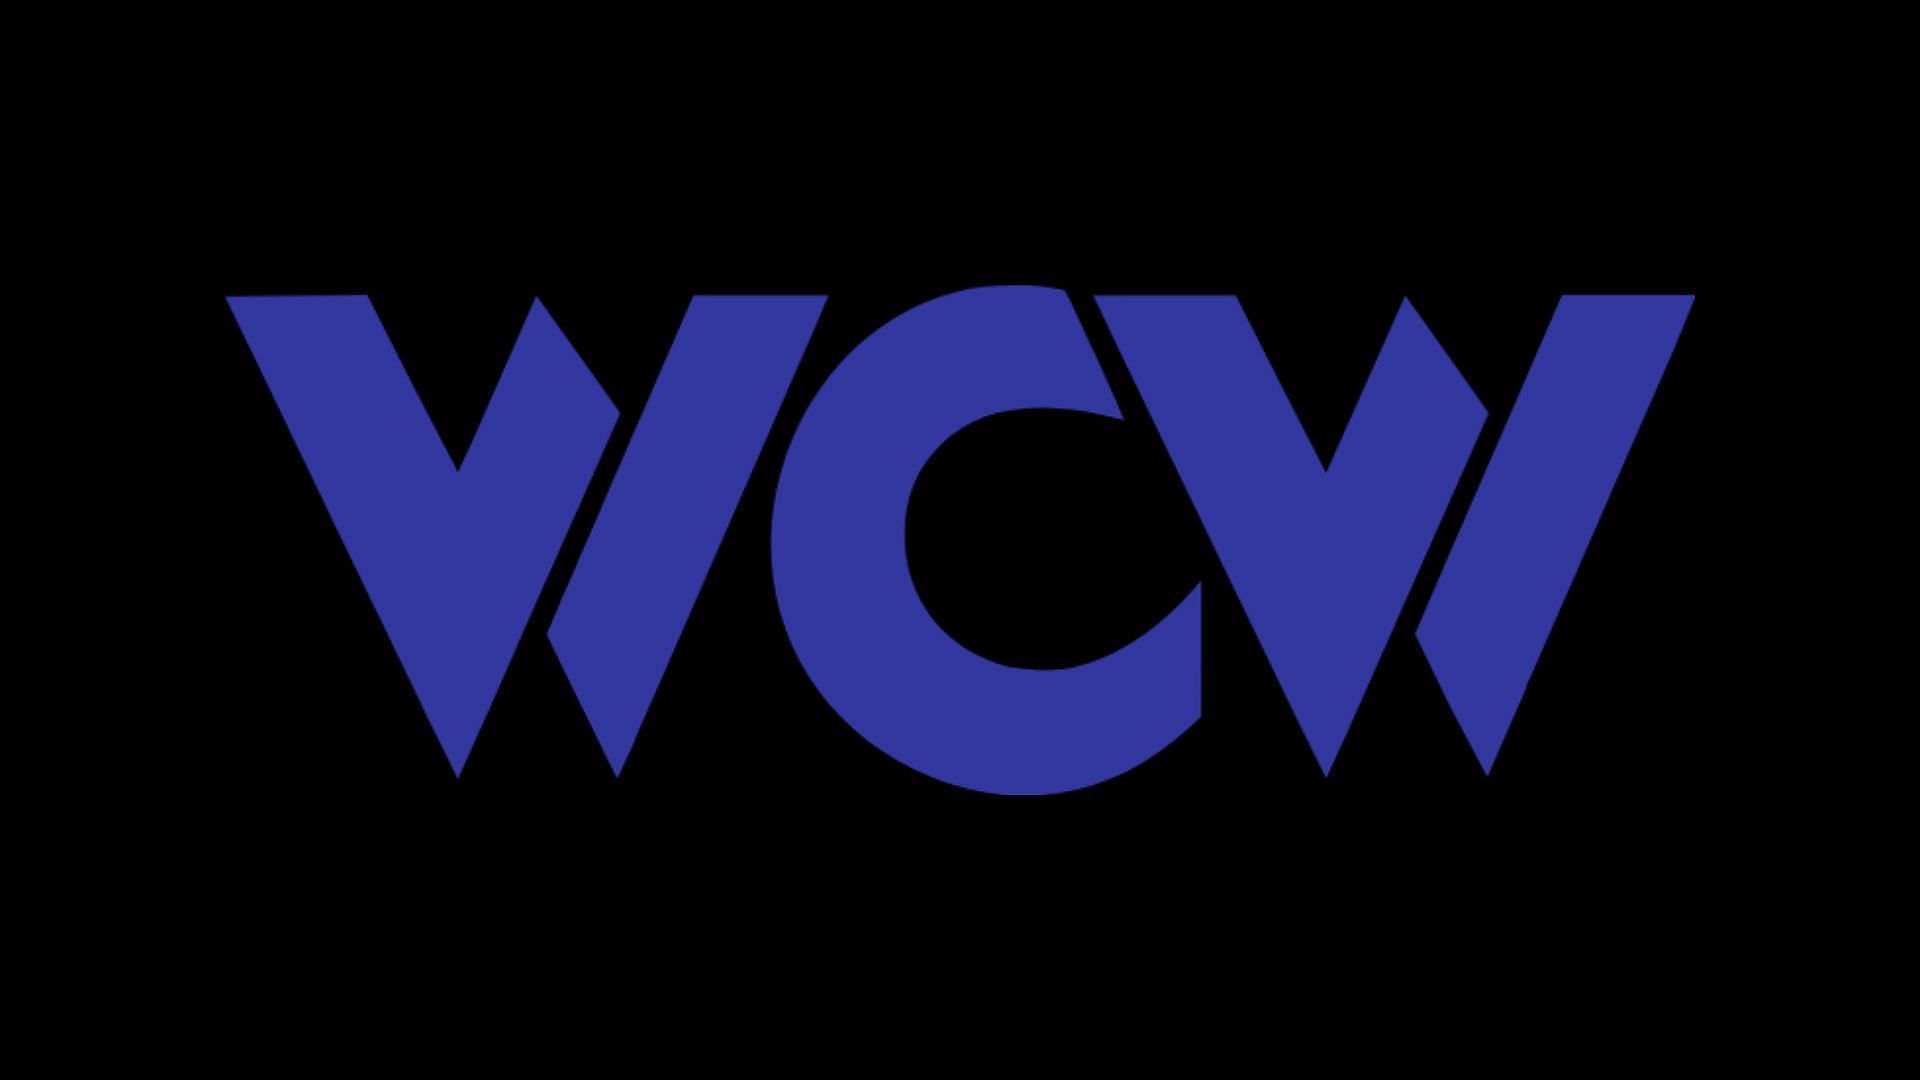 WWE Executive Chairman Vince McMahon bought WCW in 2001